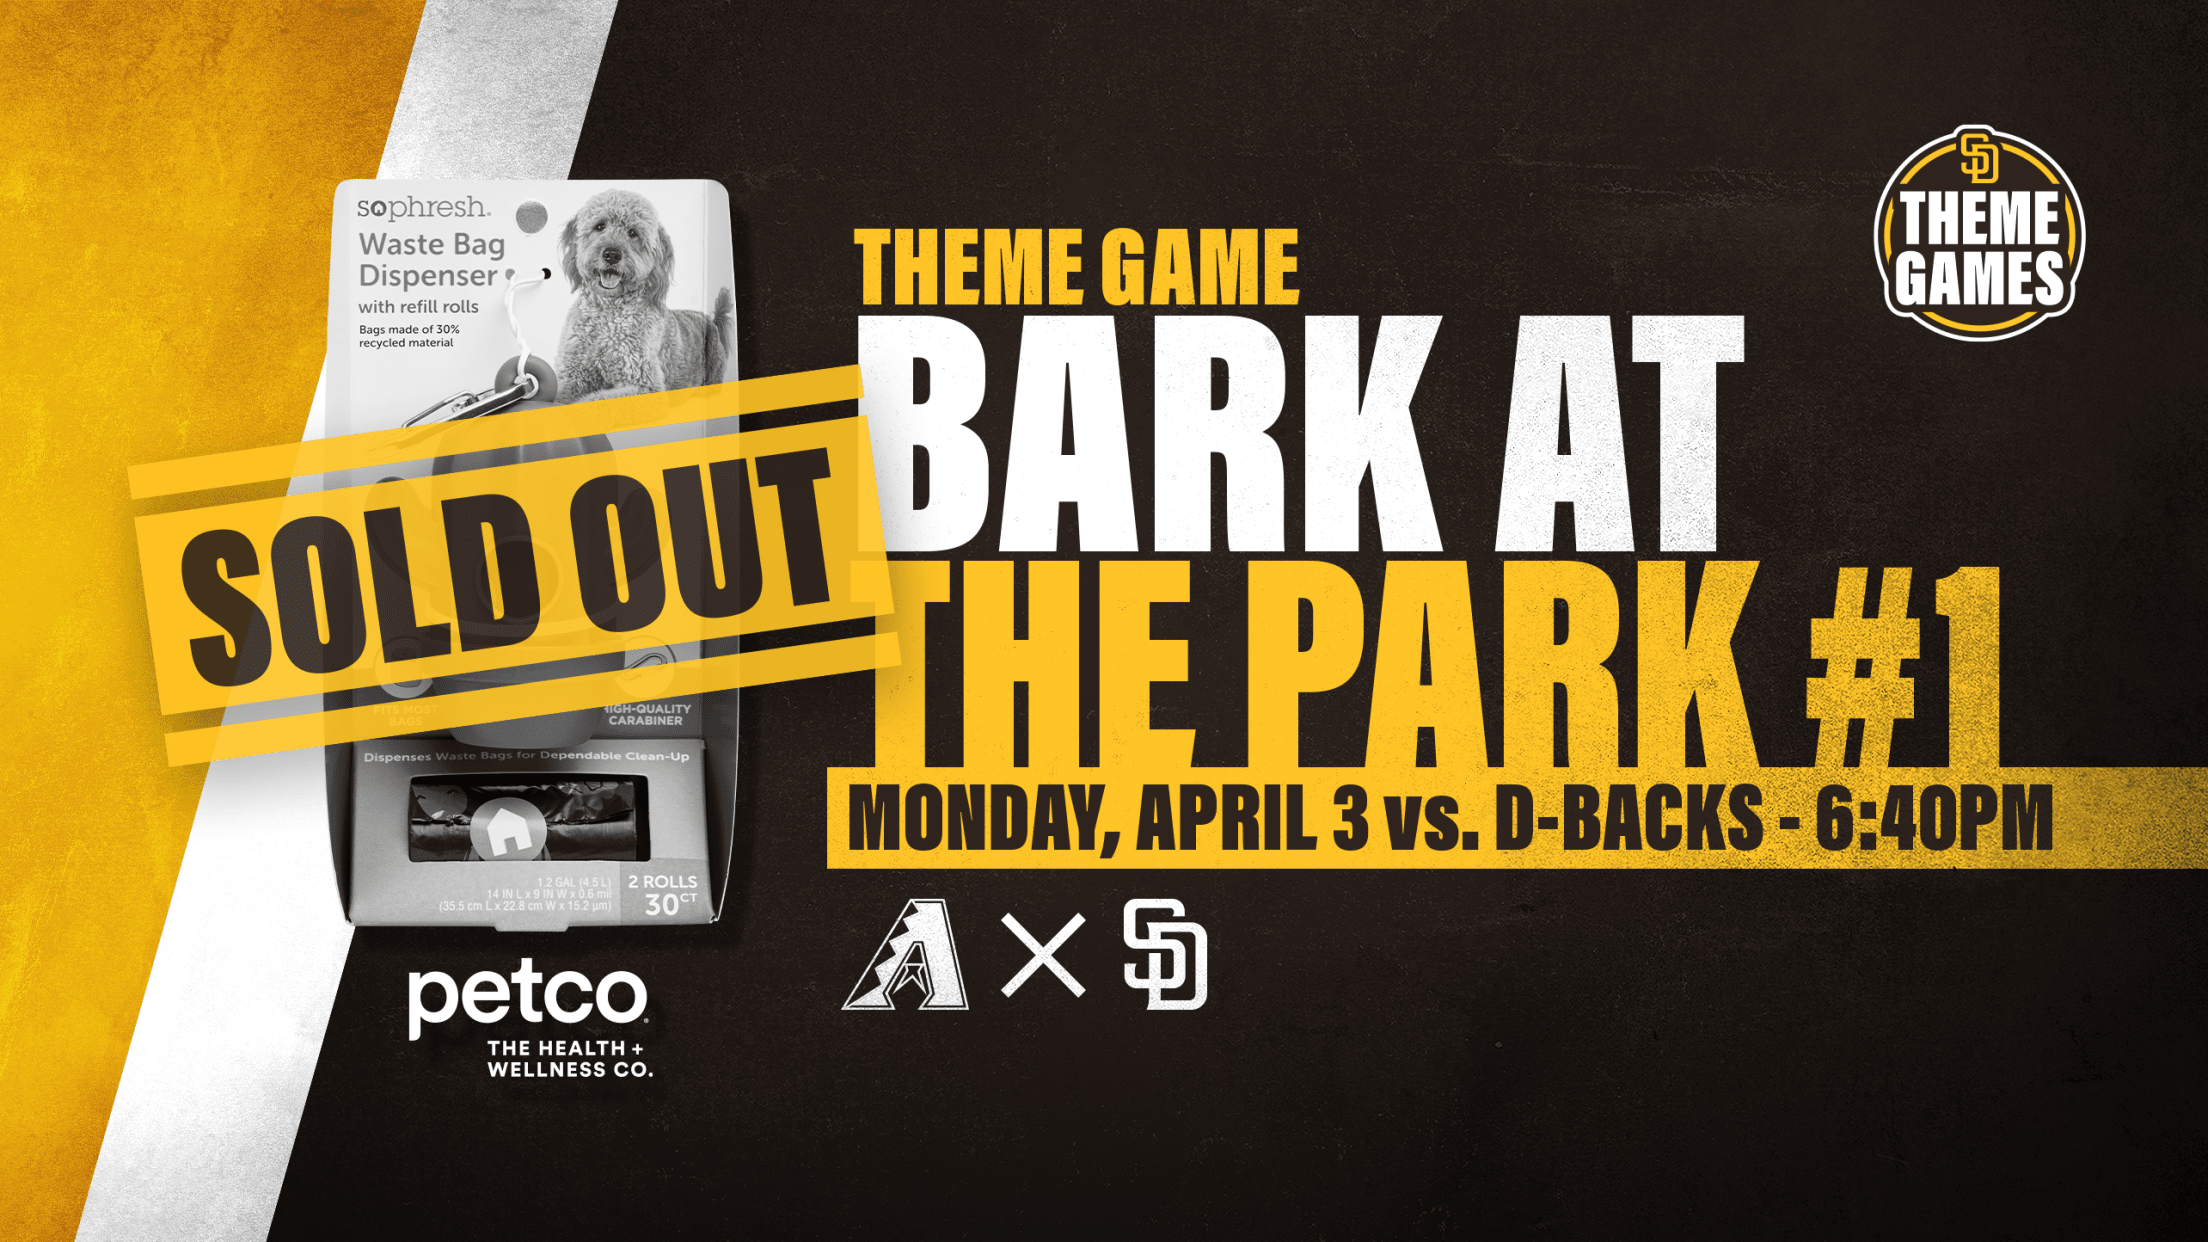 Theme Game Bark at the Park San Diego Padres